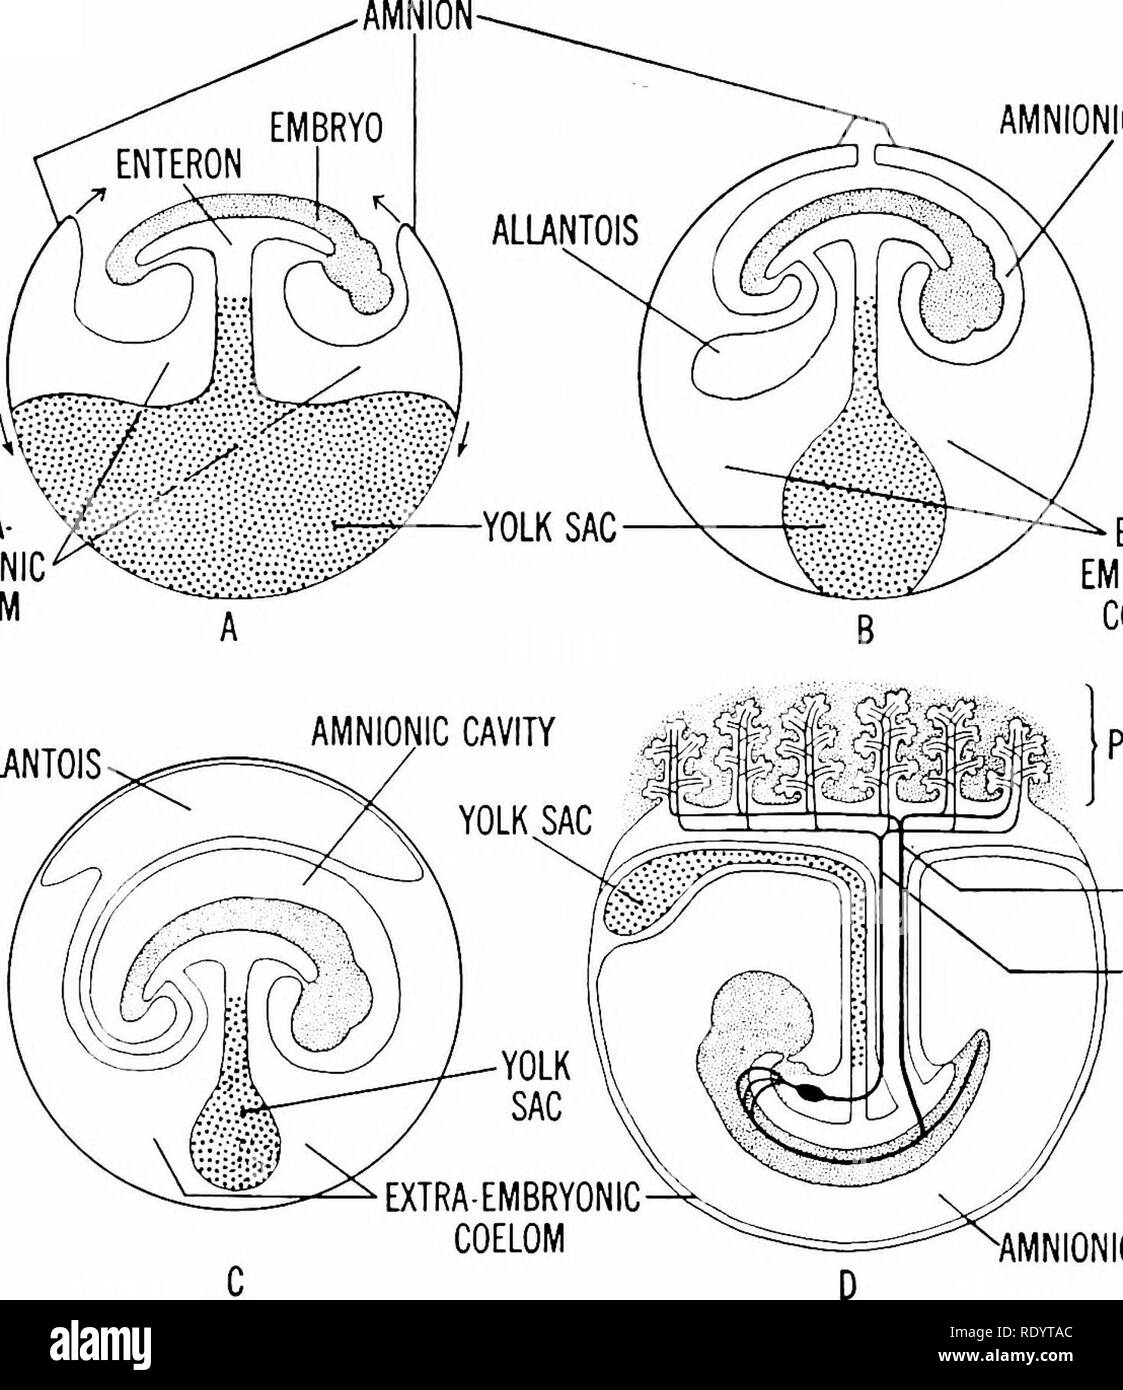 . Principles of modern biology. Biology. Reproduction in Multicellular Animals - 38V AMNIONIC CAVITY EXTRA- EMBRYONIC COELOM. ALLANTOIS EXTRA- EMBRYONIC COELOM PLACENTA UMBILICAL ARTERY UMBILICAL VEIN •AMNIONIC CAVITY Fig. 21-11. Development of the embryonic membranes and the placenta in man and higher mammals generally. Compare with membranes of the bird's egg (Fig. 21-12), noting differ- ences in the amnion, allantois, and yolk sac. oviparous (egg-laying) habits of their aquatic ancestors. Eggs laid on land, however, are al- ways covered by a shell and other protective membranes, for otherwi Stock Photo